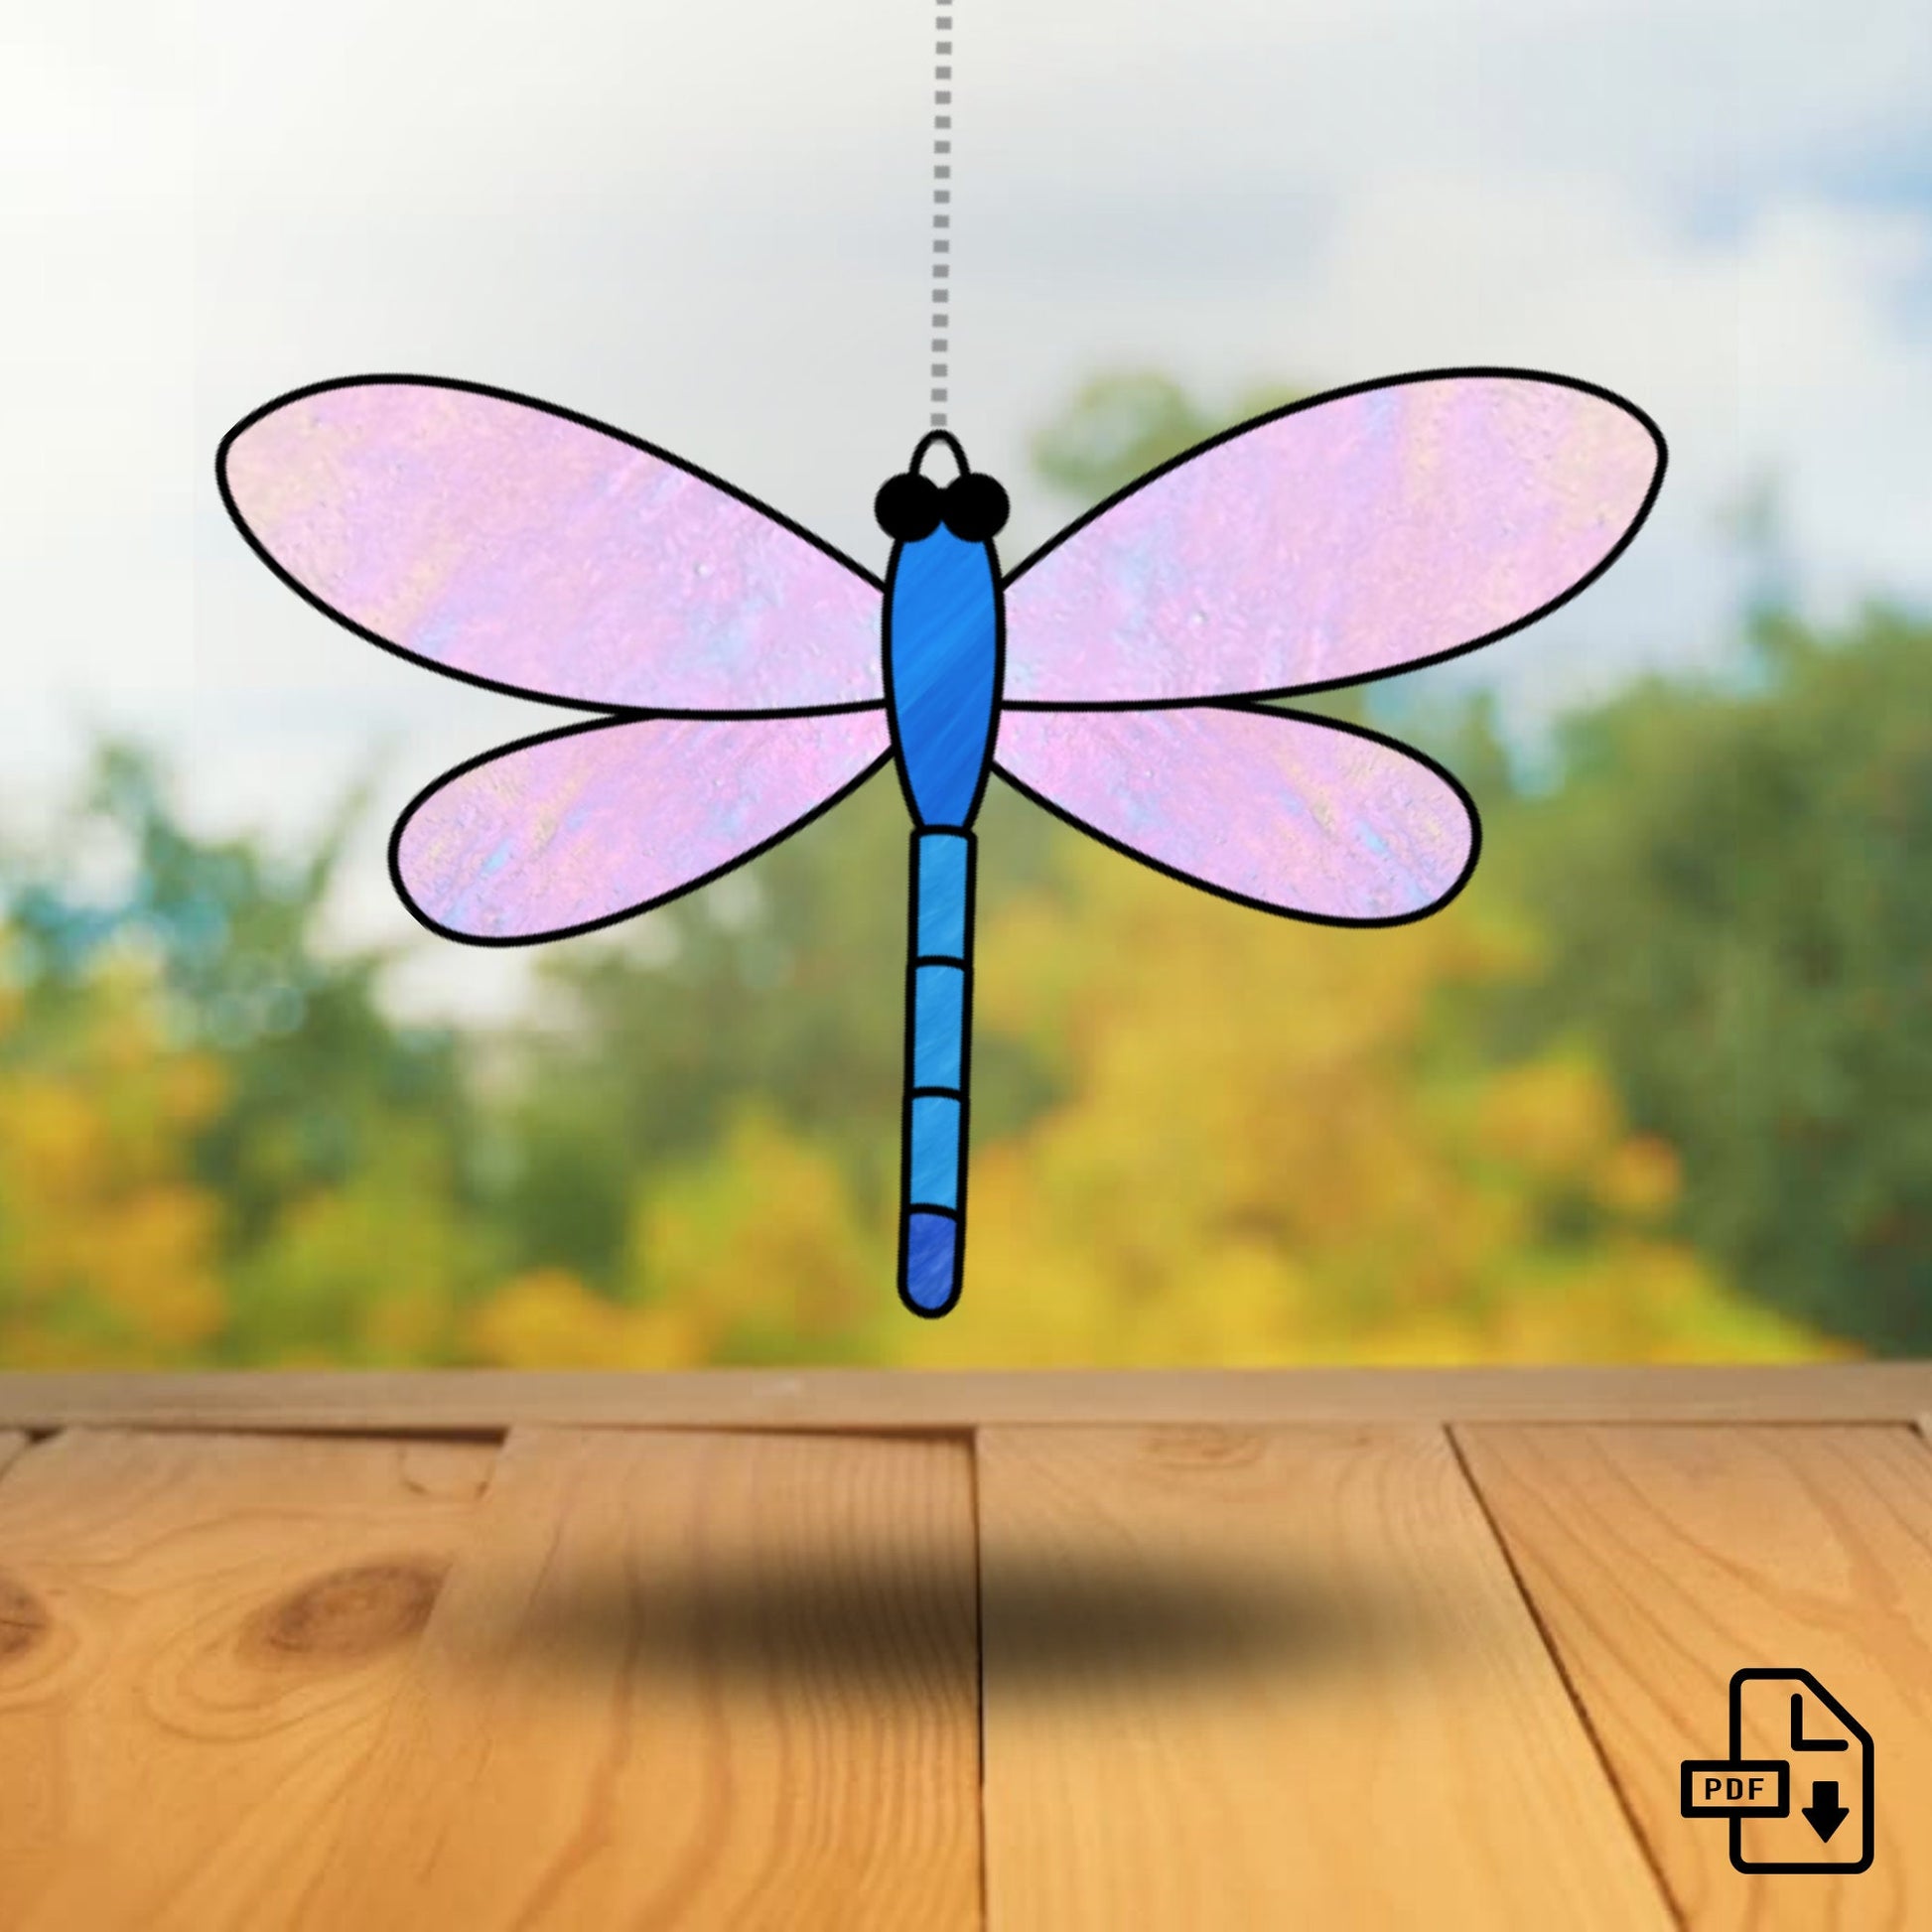 Free Stained Glass Patterns - Garden Pond Dragonfly Pattern by